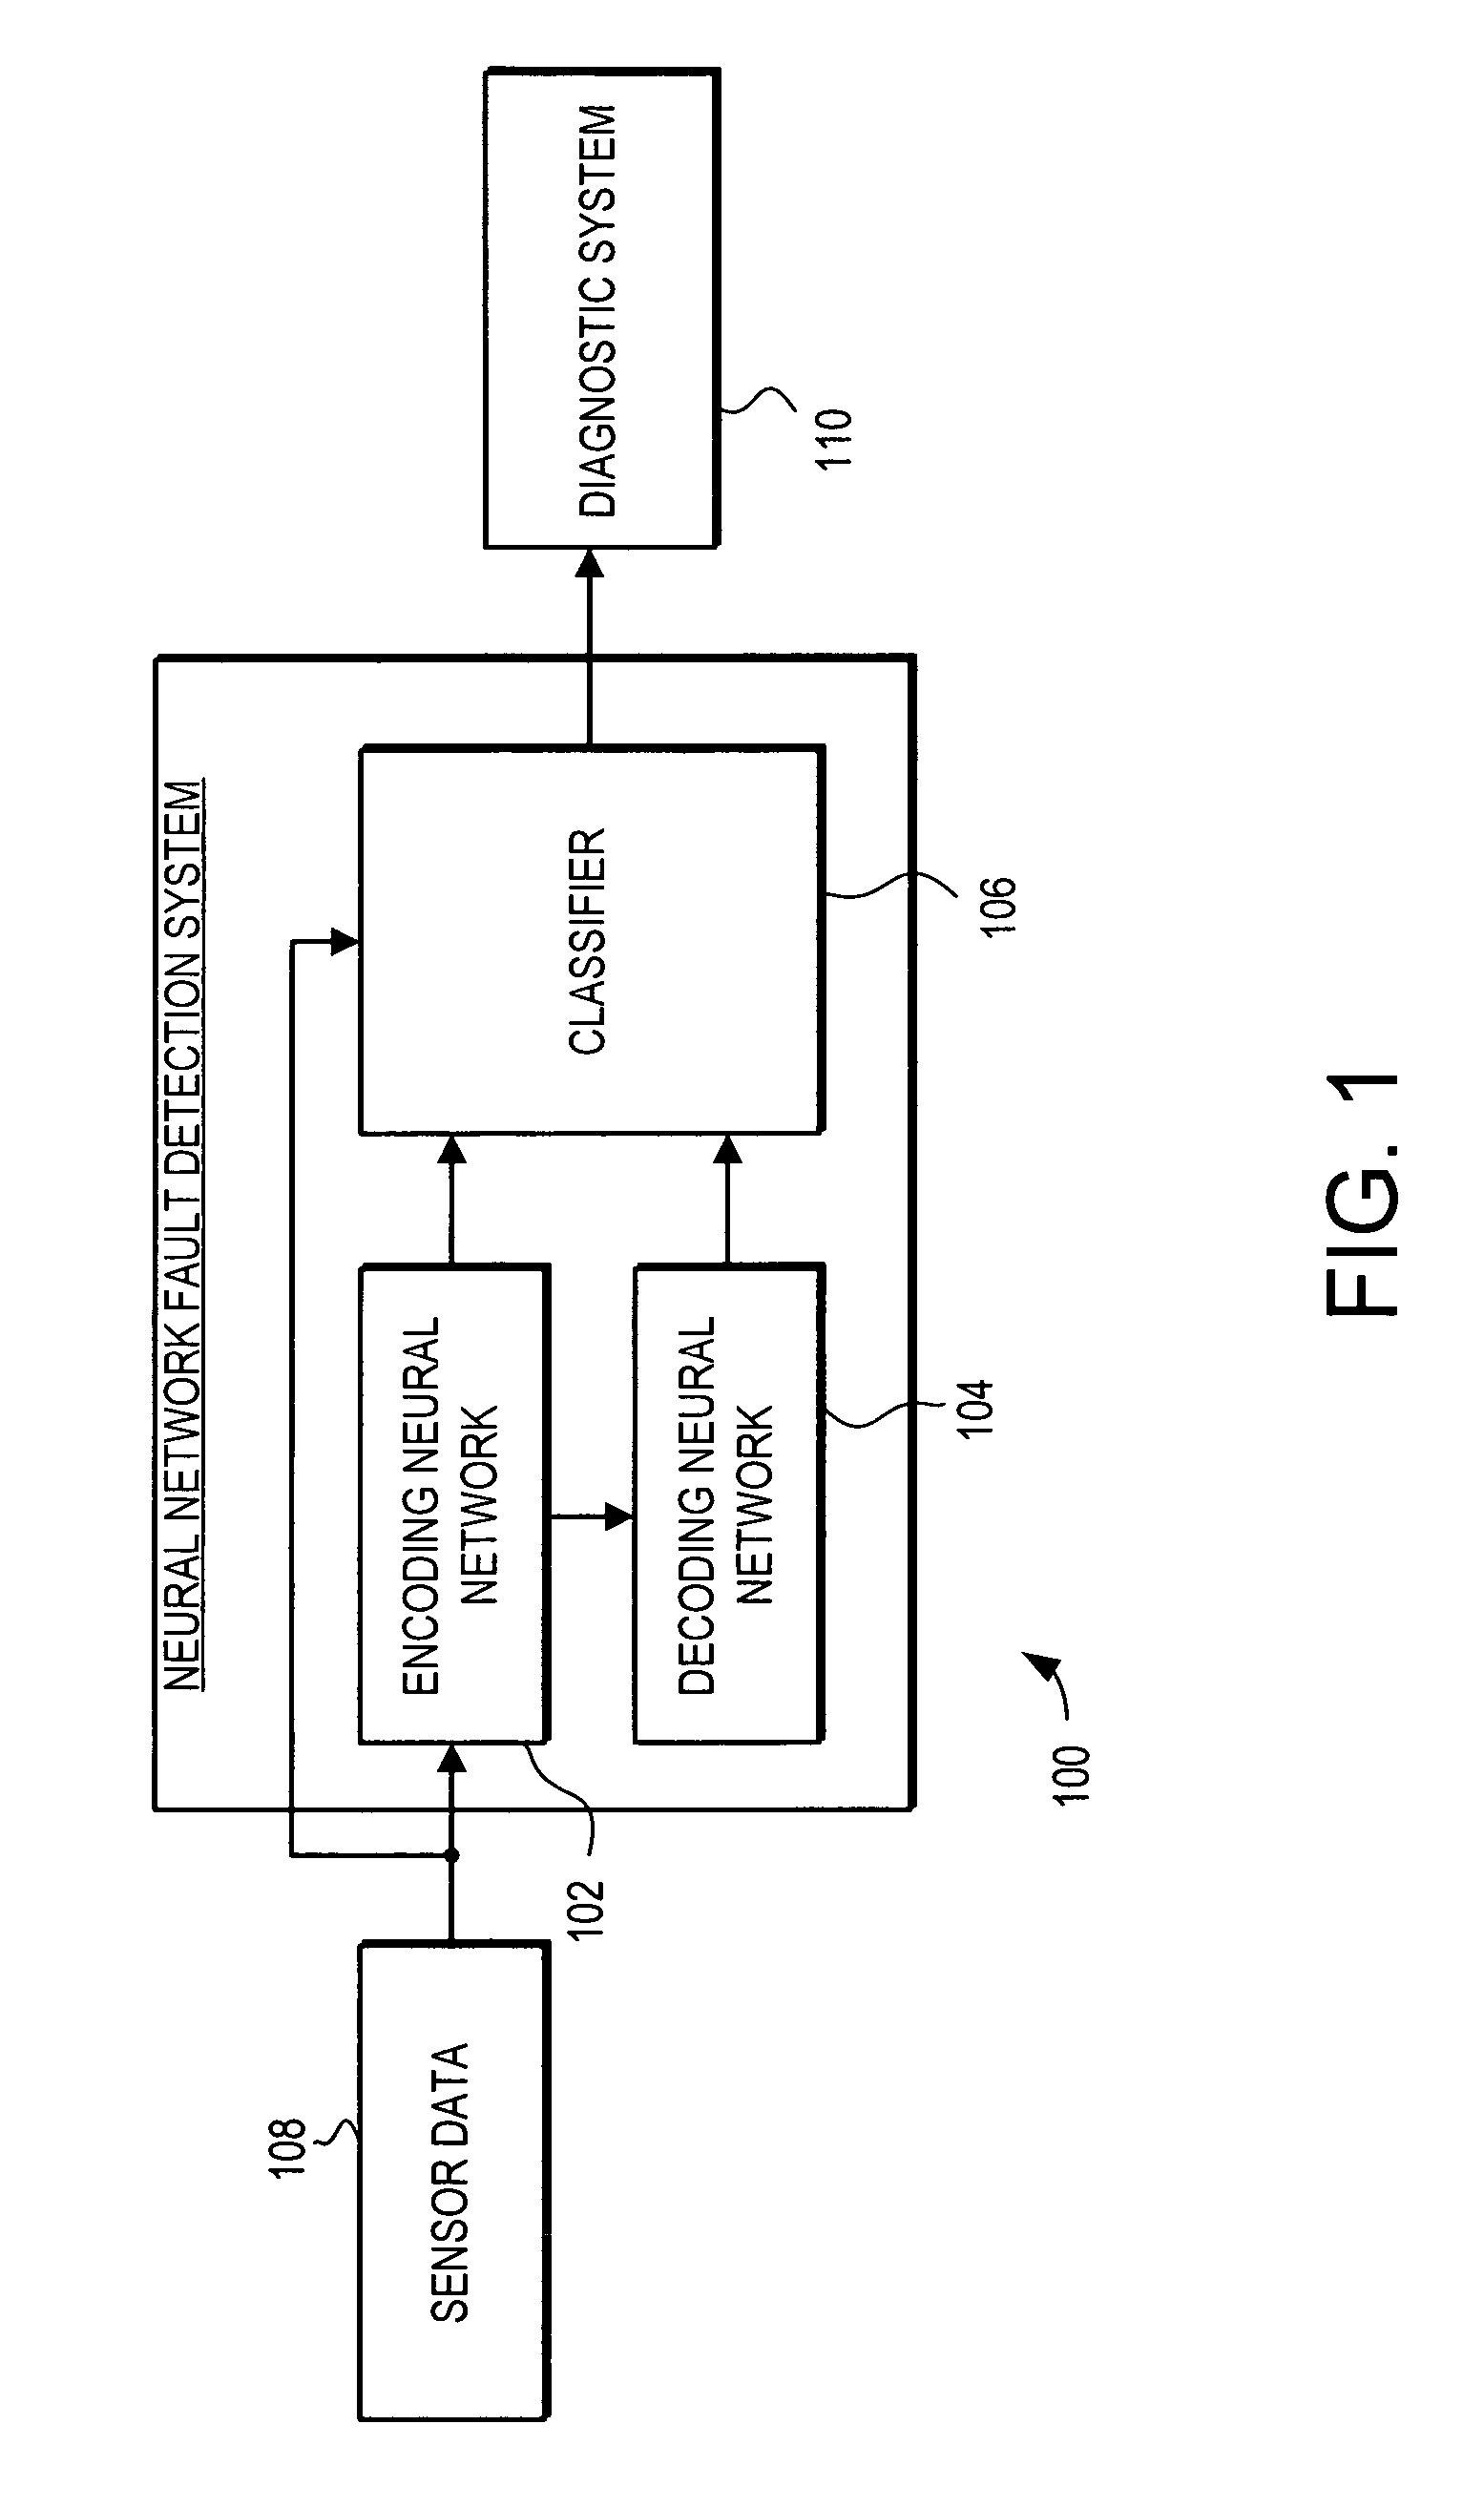 Nonlinear neural network fault detection system and method